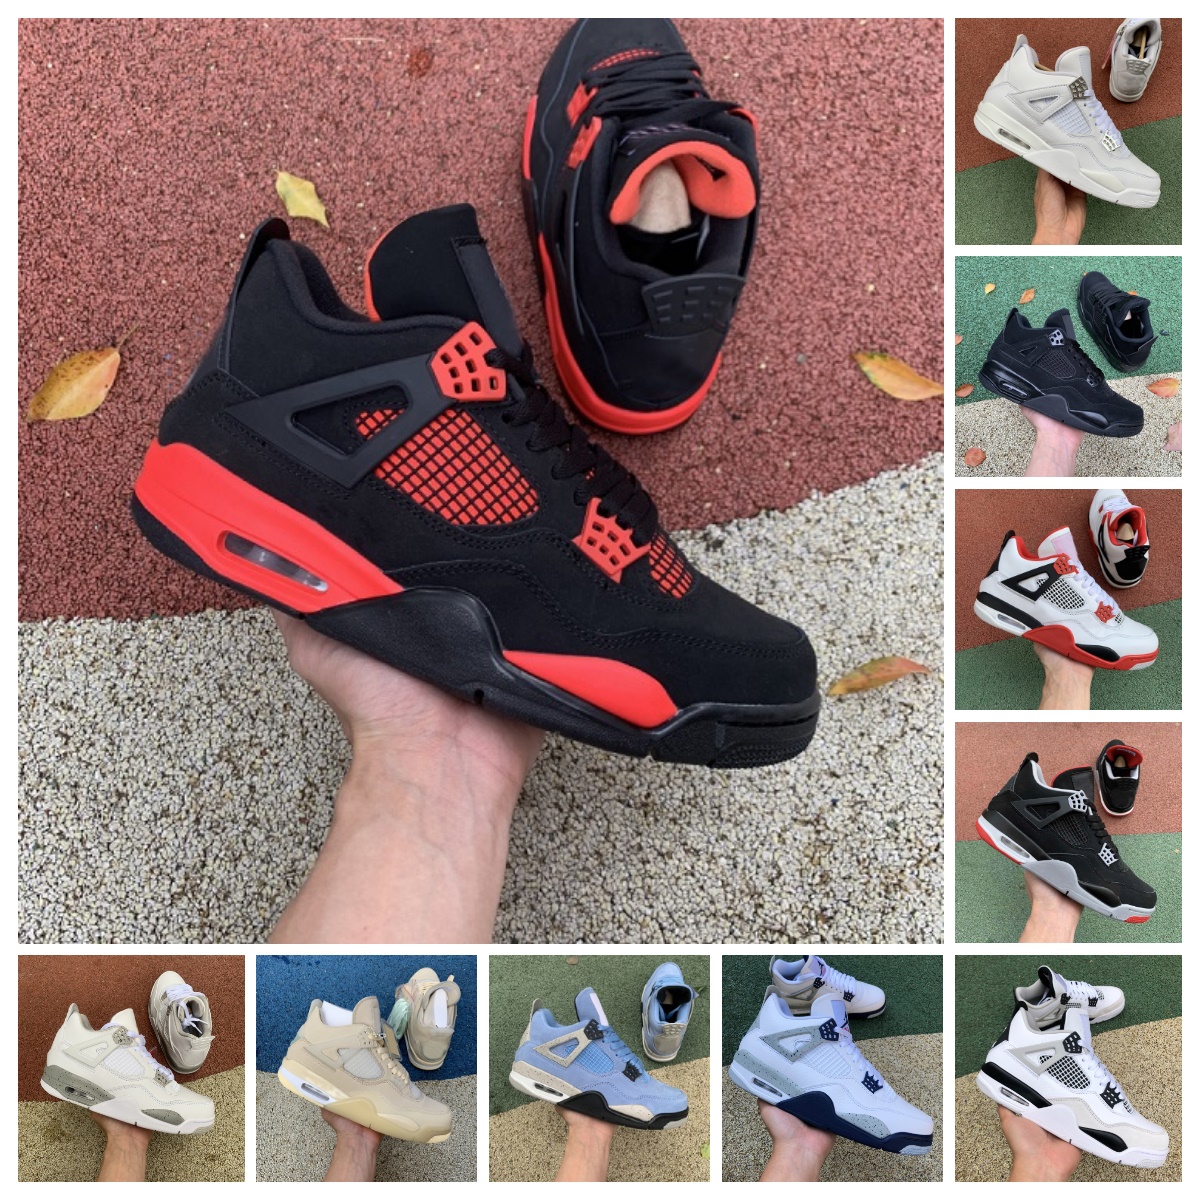 

Jumpman 4 4s Basketball Shoes Mens Women Military Black Cat Infrared Bred Red Thunder Oreo Sail White Cement Bred University Blue Taupe Haze Neon What The Sneakers, Bubble package bag